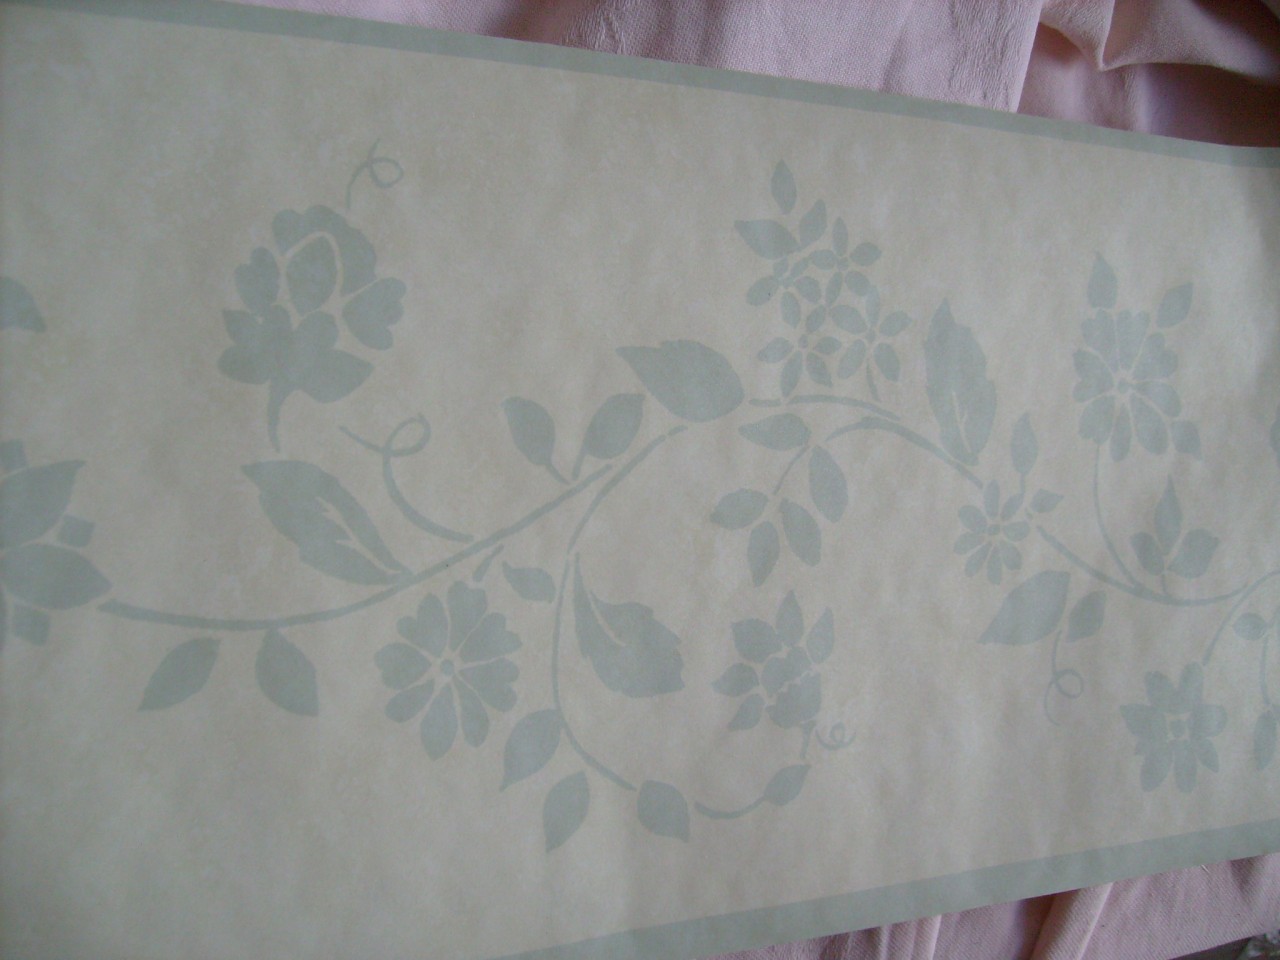 Details About Shand Kydd Pastel Green Wallpaper Borders Bn Cm